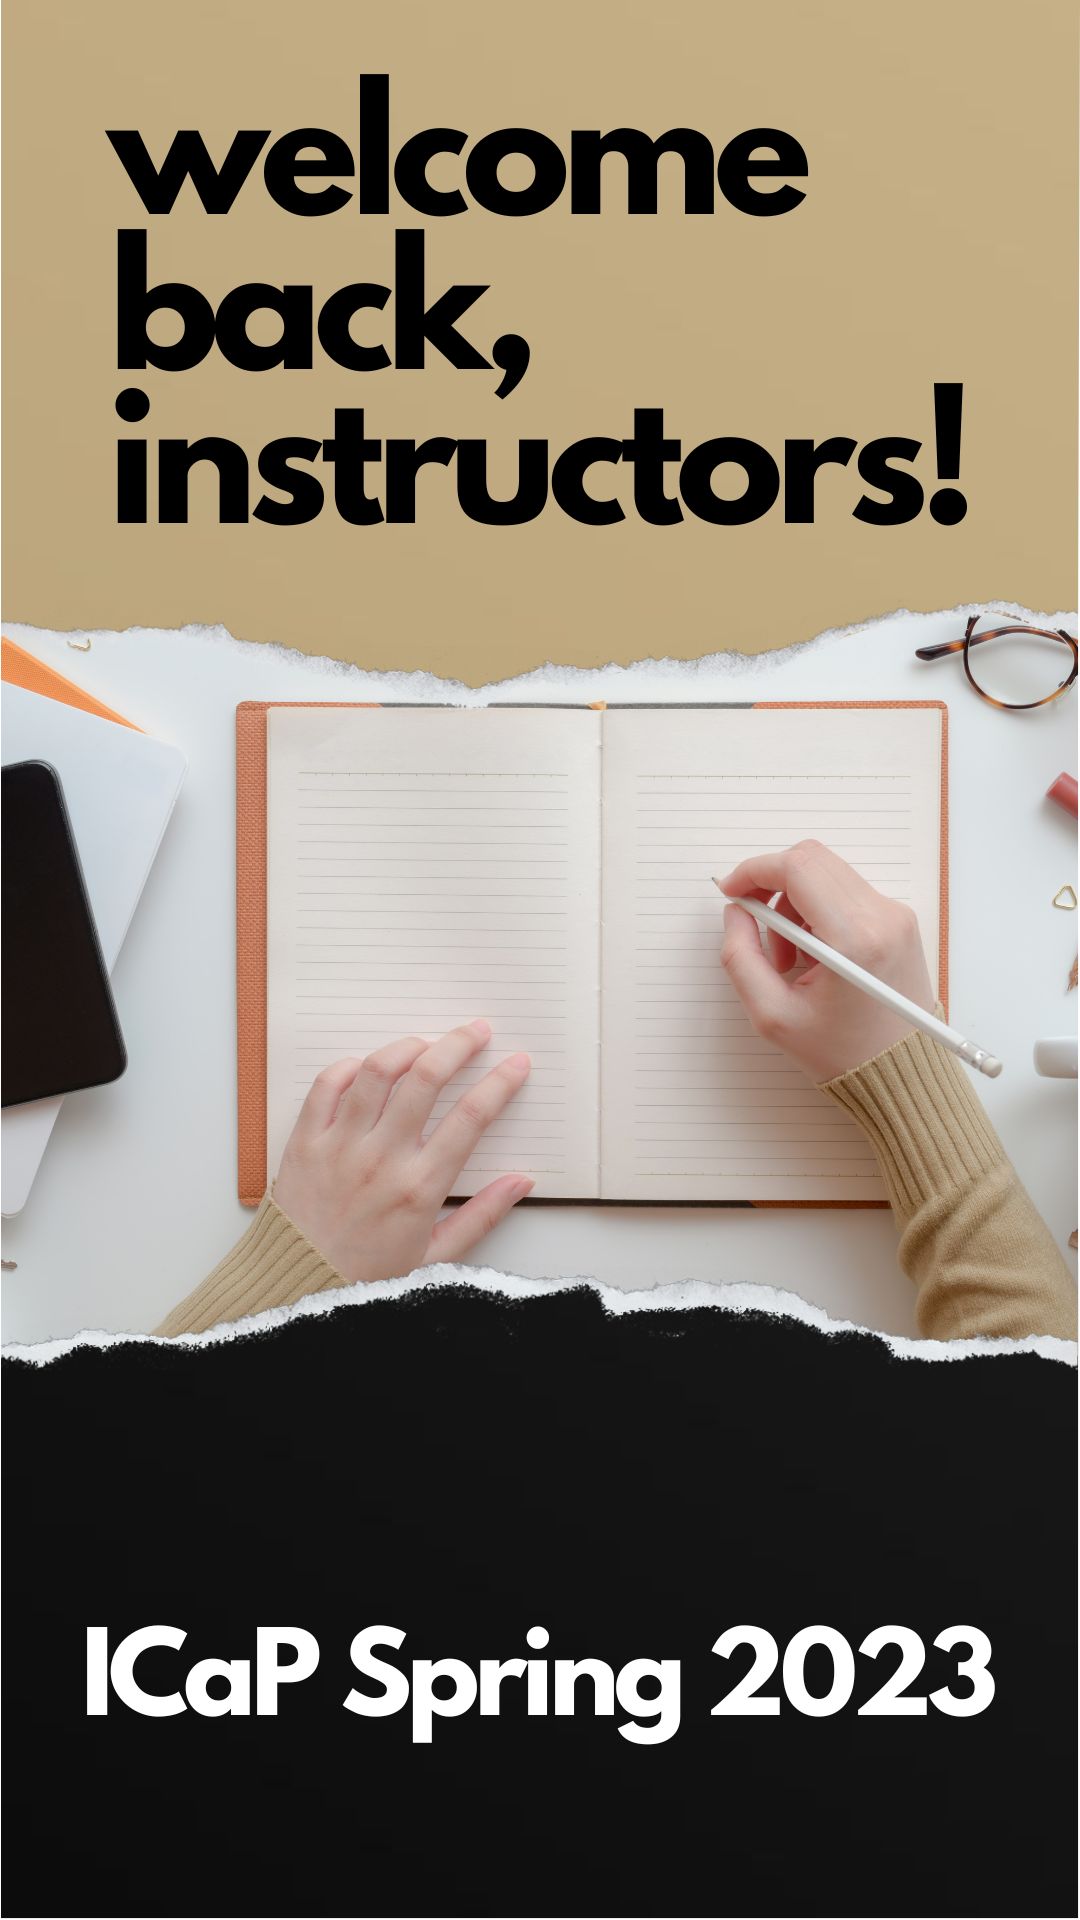 vertical image with gold and black borders featuring a photo of hands writing in a notebook. text reads "welcome back, instructors! ICaP Spring 2023"